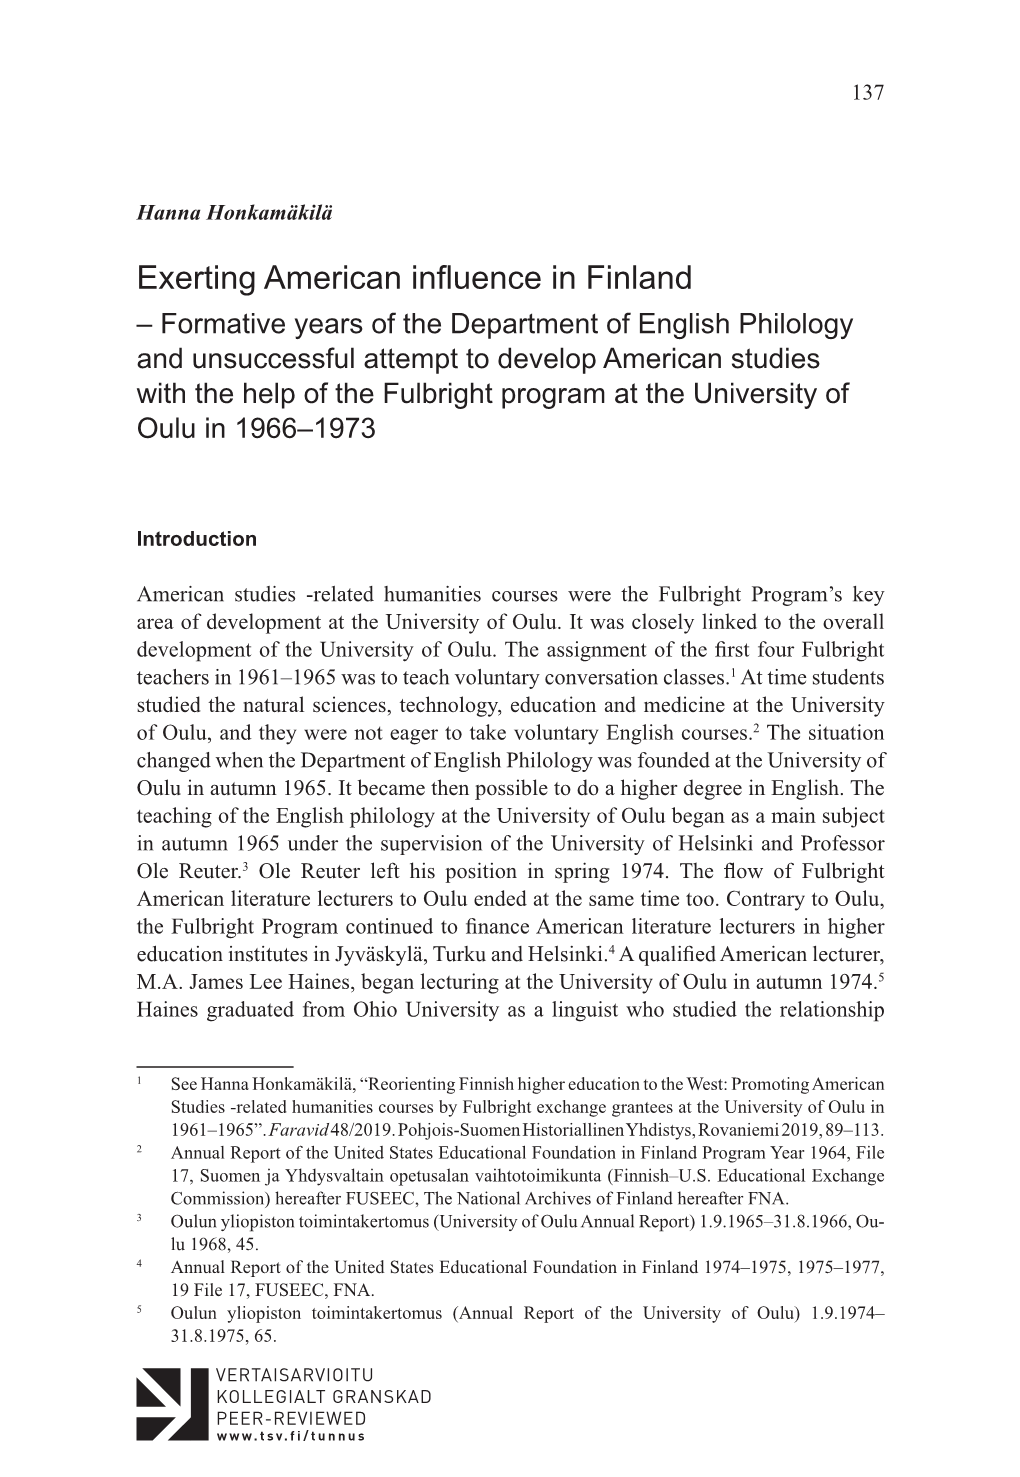 Exerting American Influence in Finland